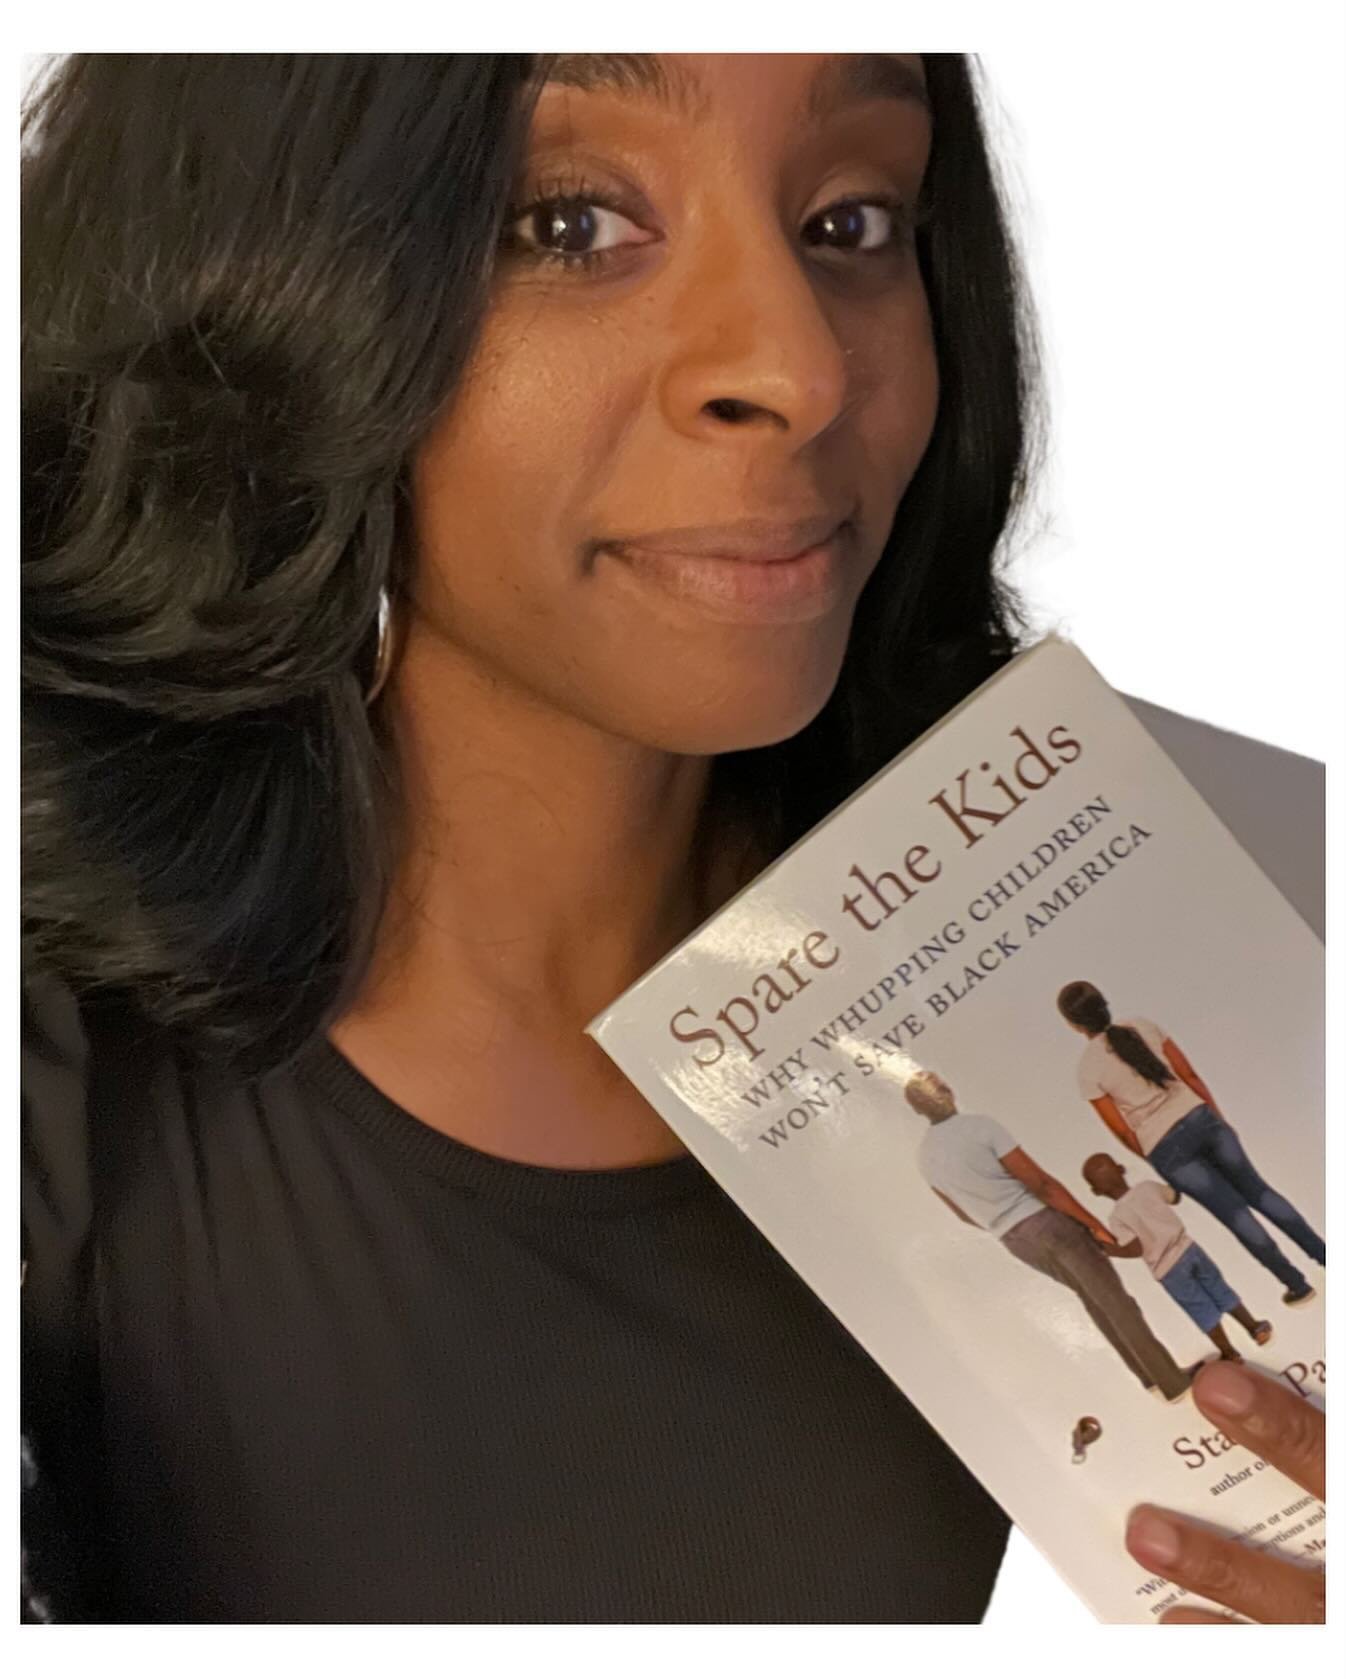 In Spare the Kids, Dr. Stacey Patton discusses the impact of traditional disciplinary methods on the Black community. Dr. Patton unpacks how corporal punishment not only fails to address systemic racism but also reinforces the deep-seated racist beli